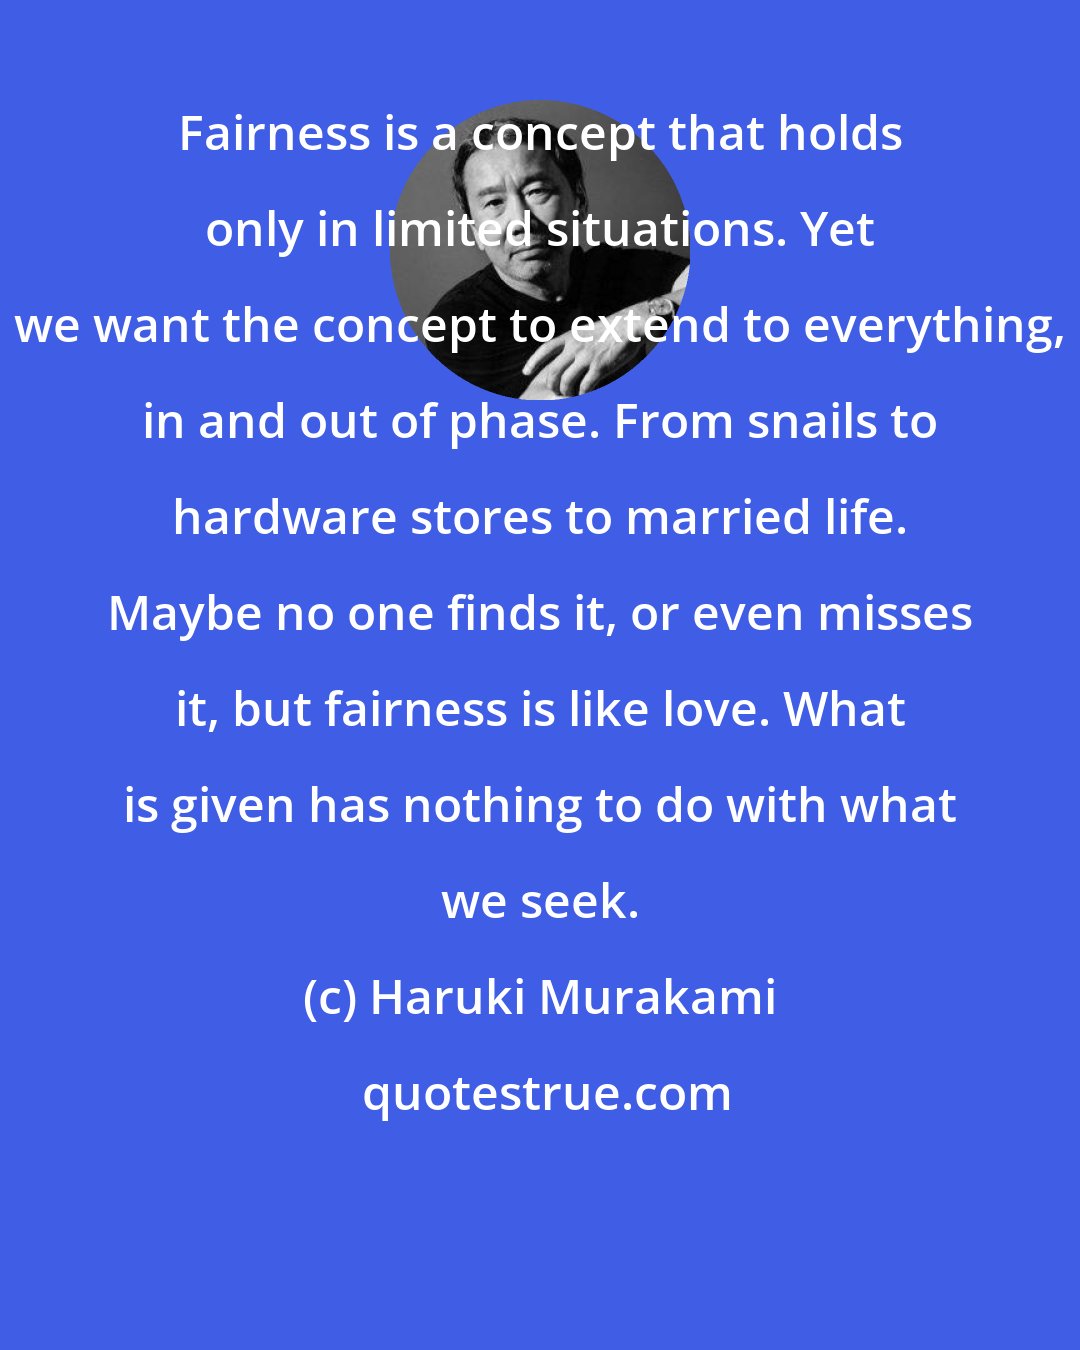 Haruki Murakami: Fairness is a concept that holds only in limited situations. Yet we want the concept to extend to everything, in and out of phase. From snails to hardware stores to married life. Maybe no one finds it, or even misses it, but fairness is like love. What is given has nothing to do with what we seek.